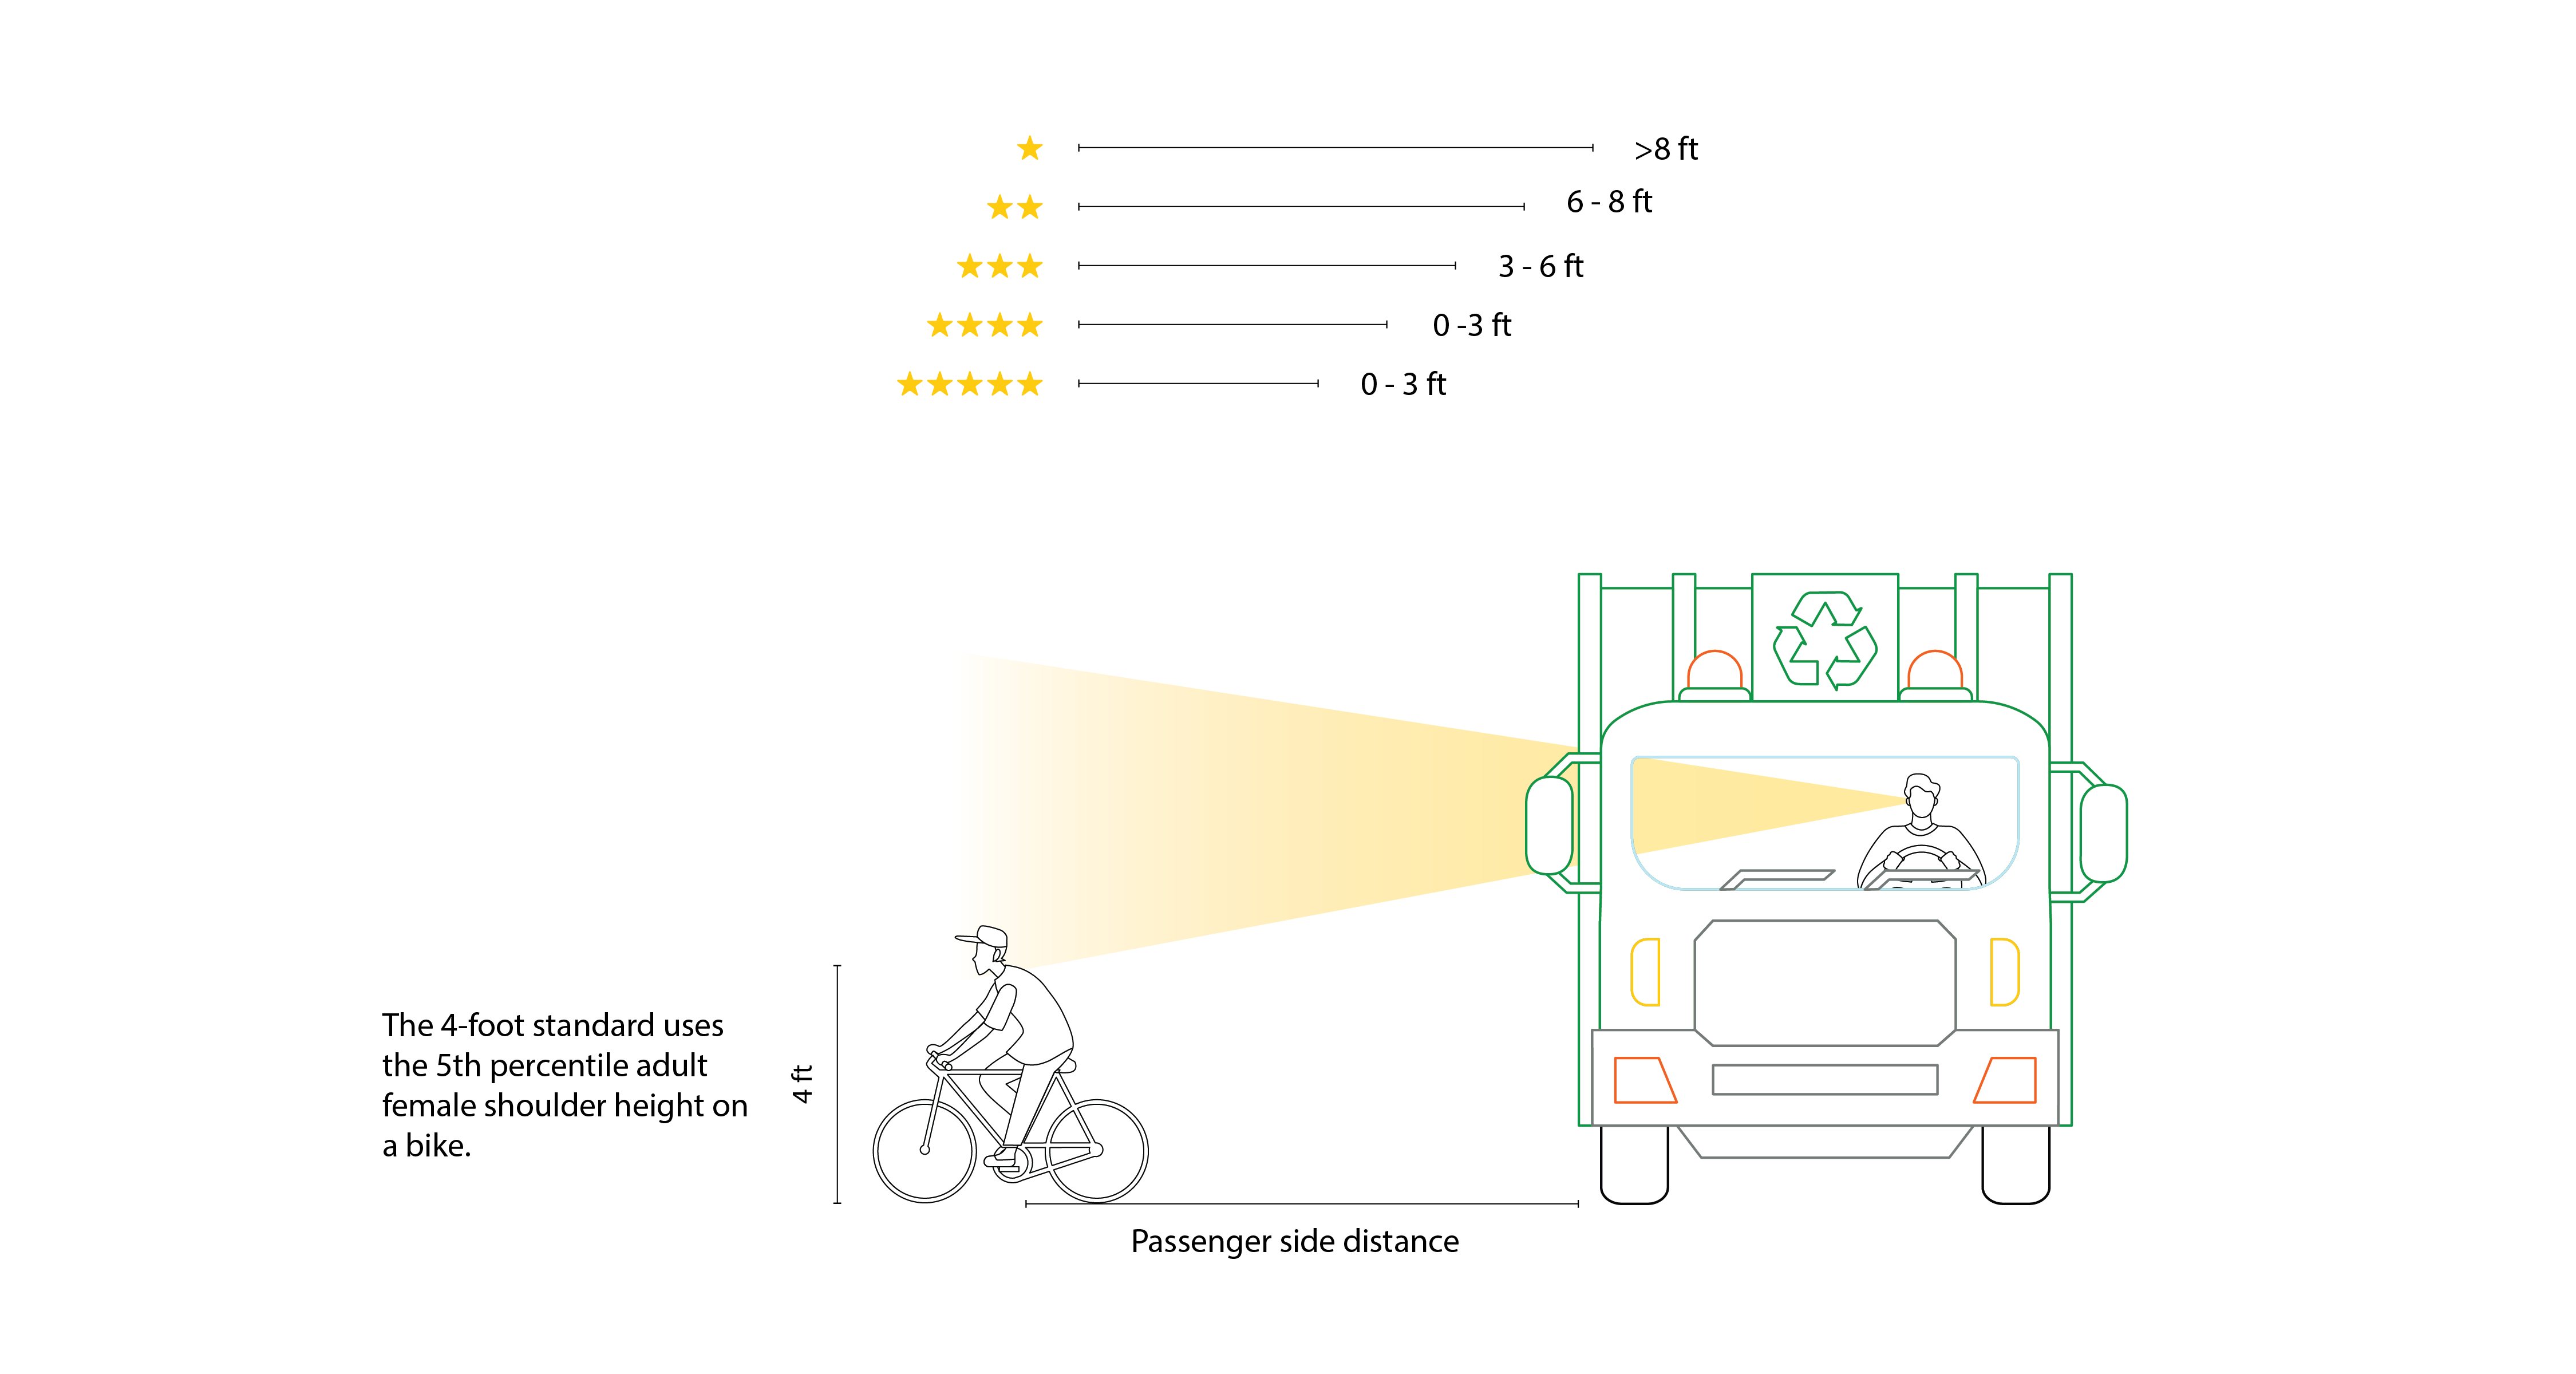 Vehicle direct vision and rating from the passenger side